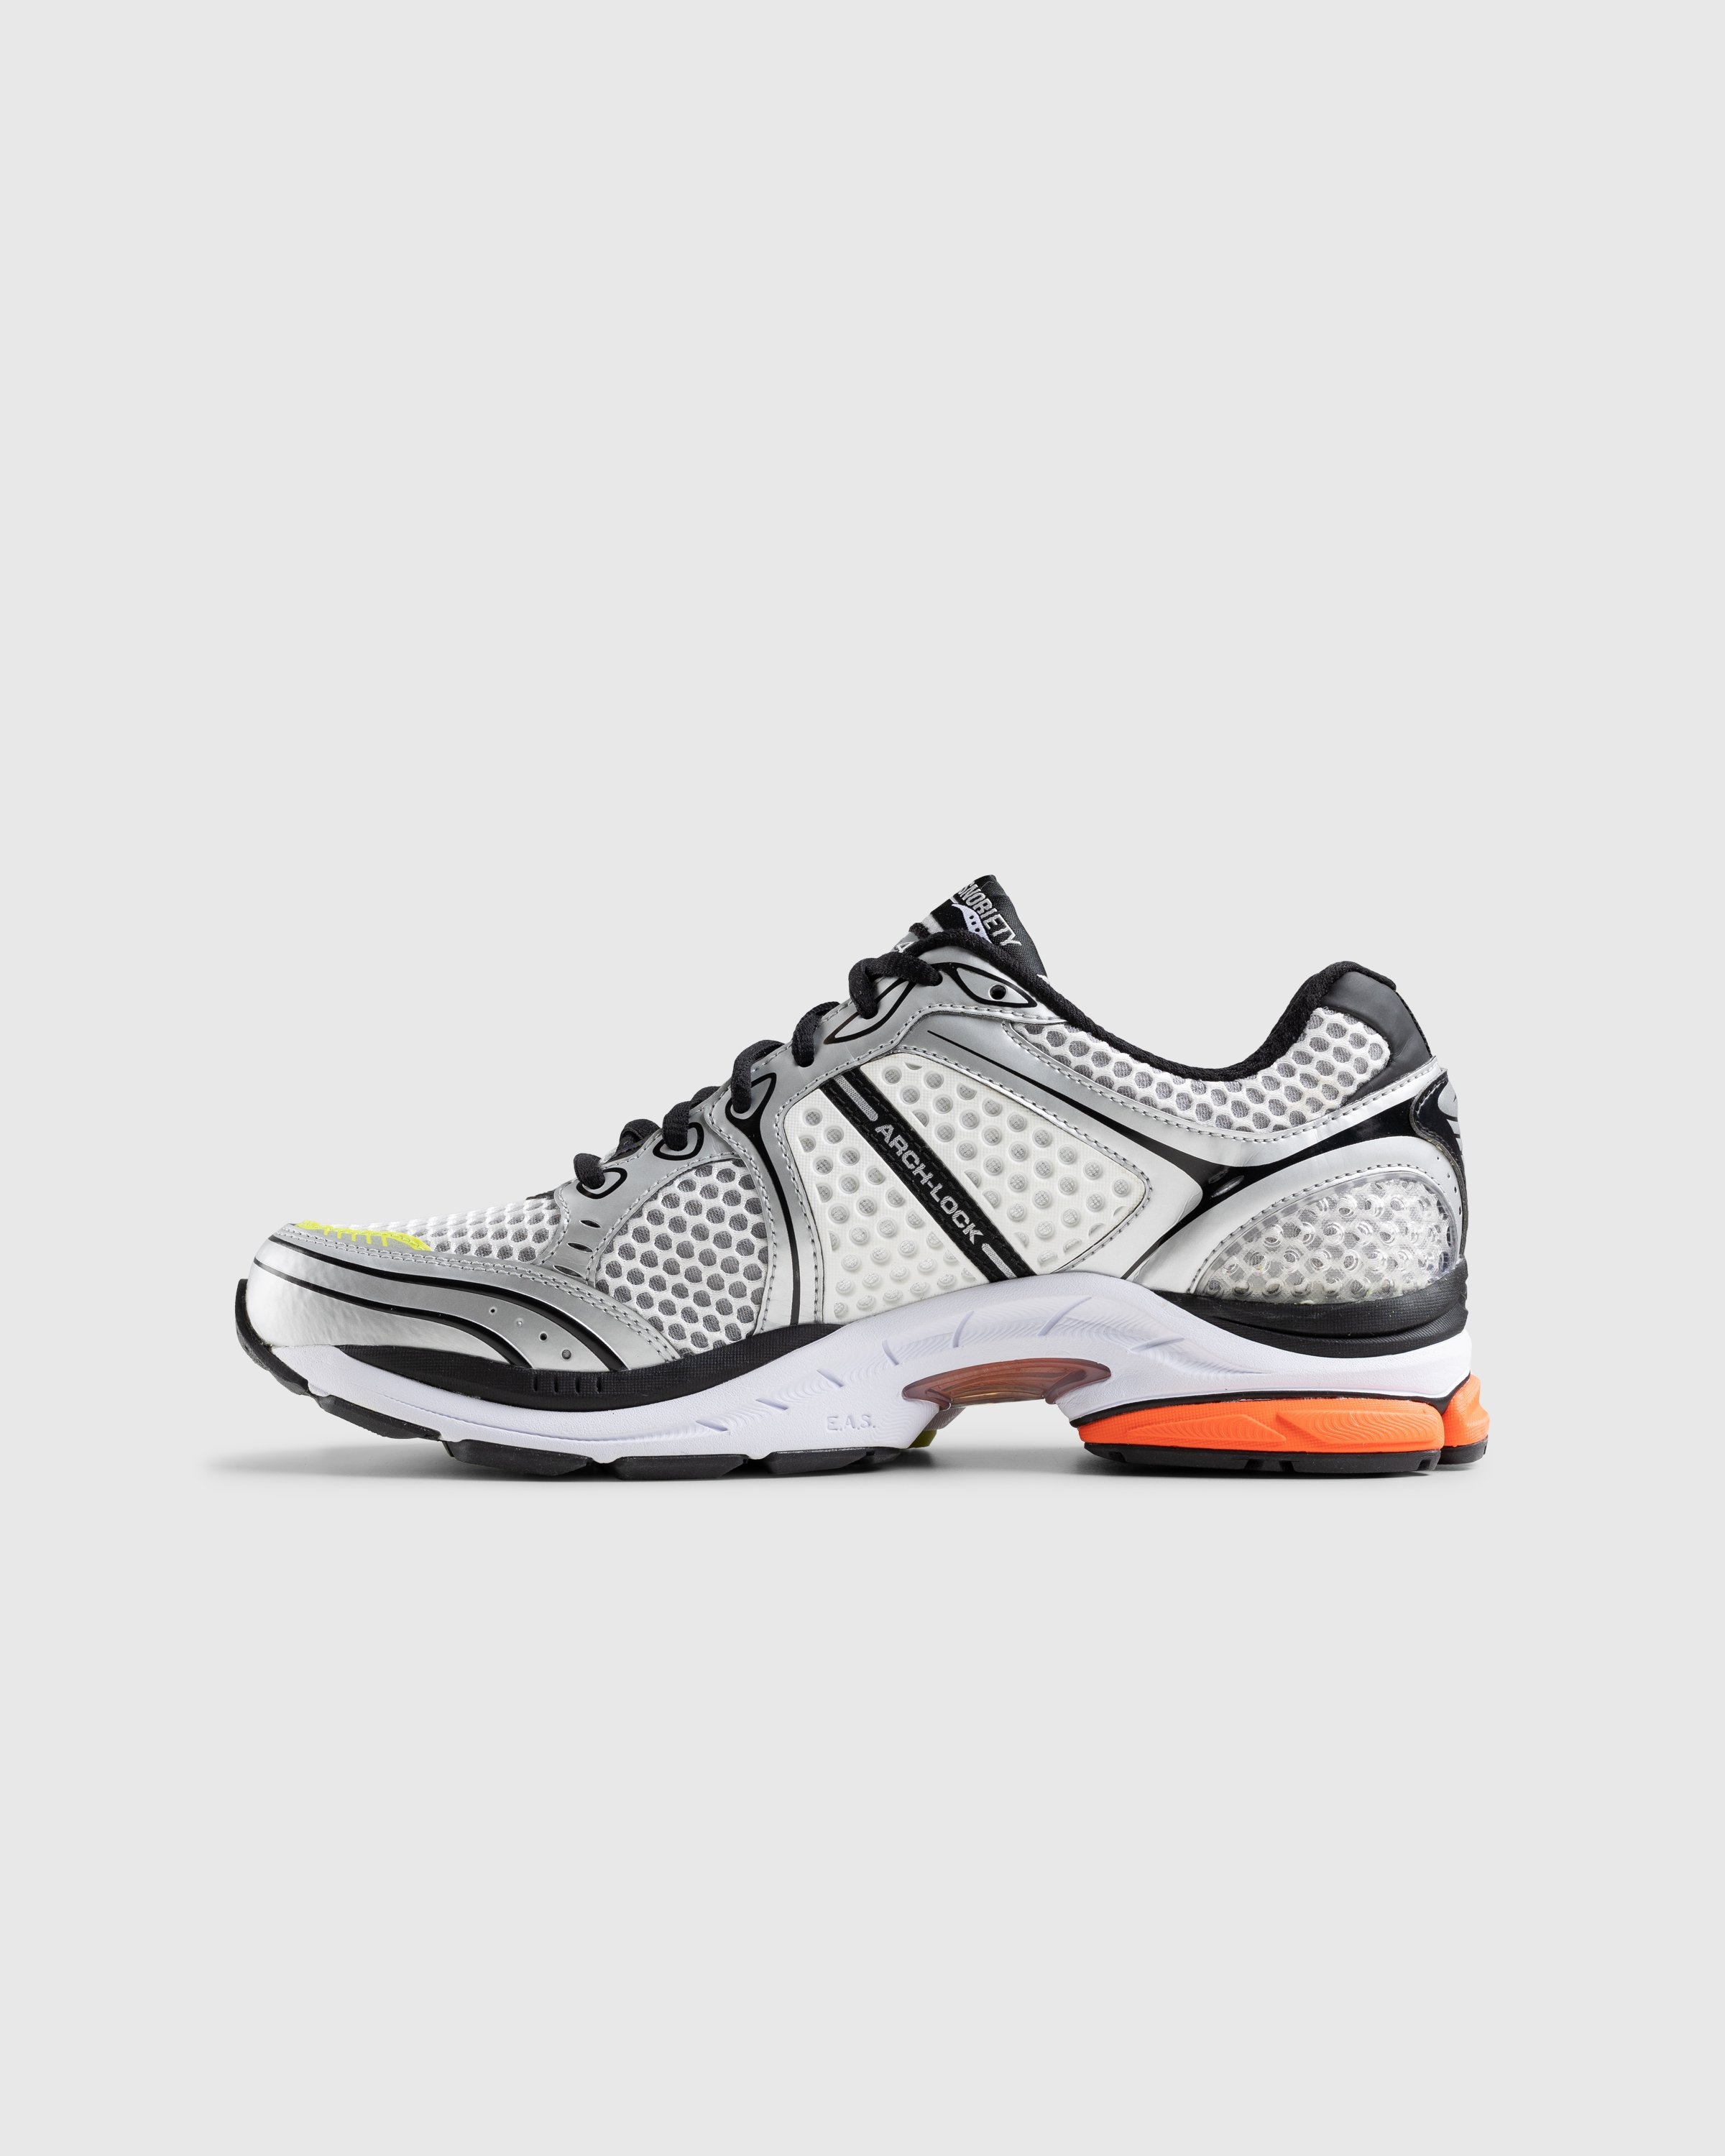 Saucony x Highsnobiety – Pro Grid Triumph 4 Silver/Multi - Sneakers - Silver - Image 2